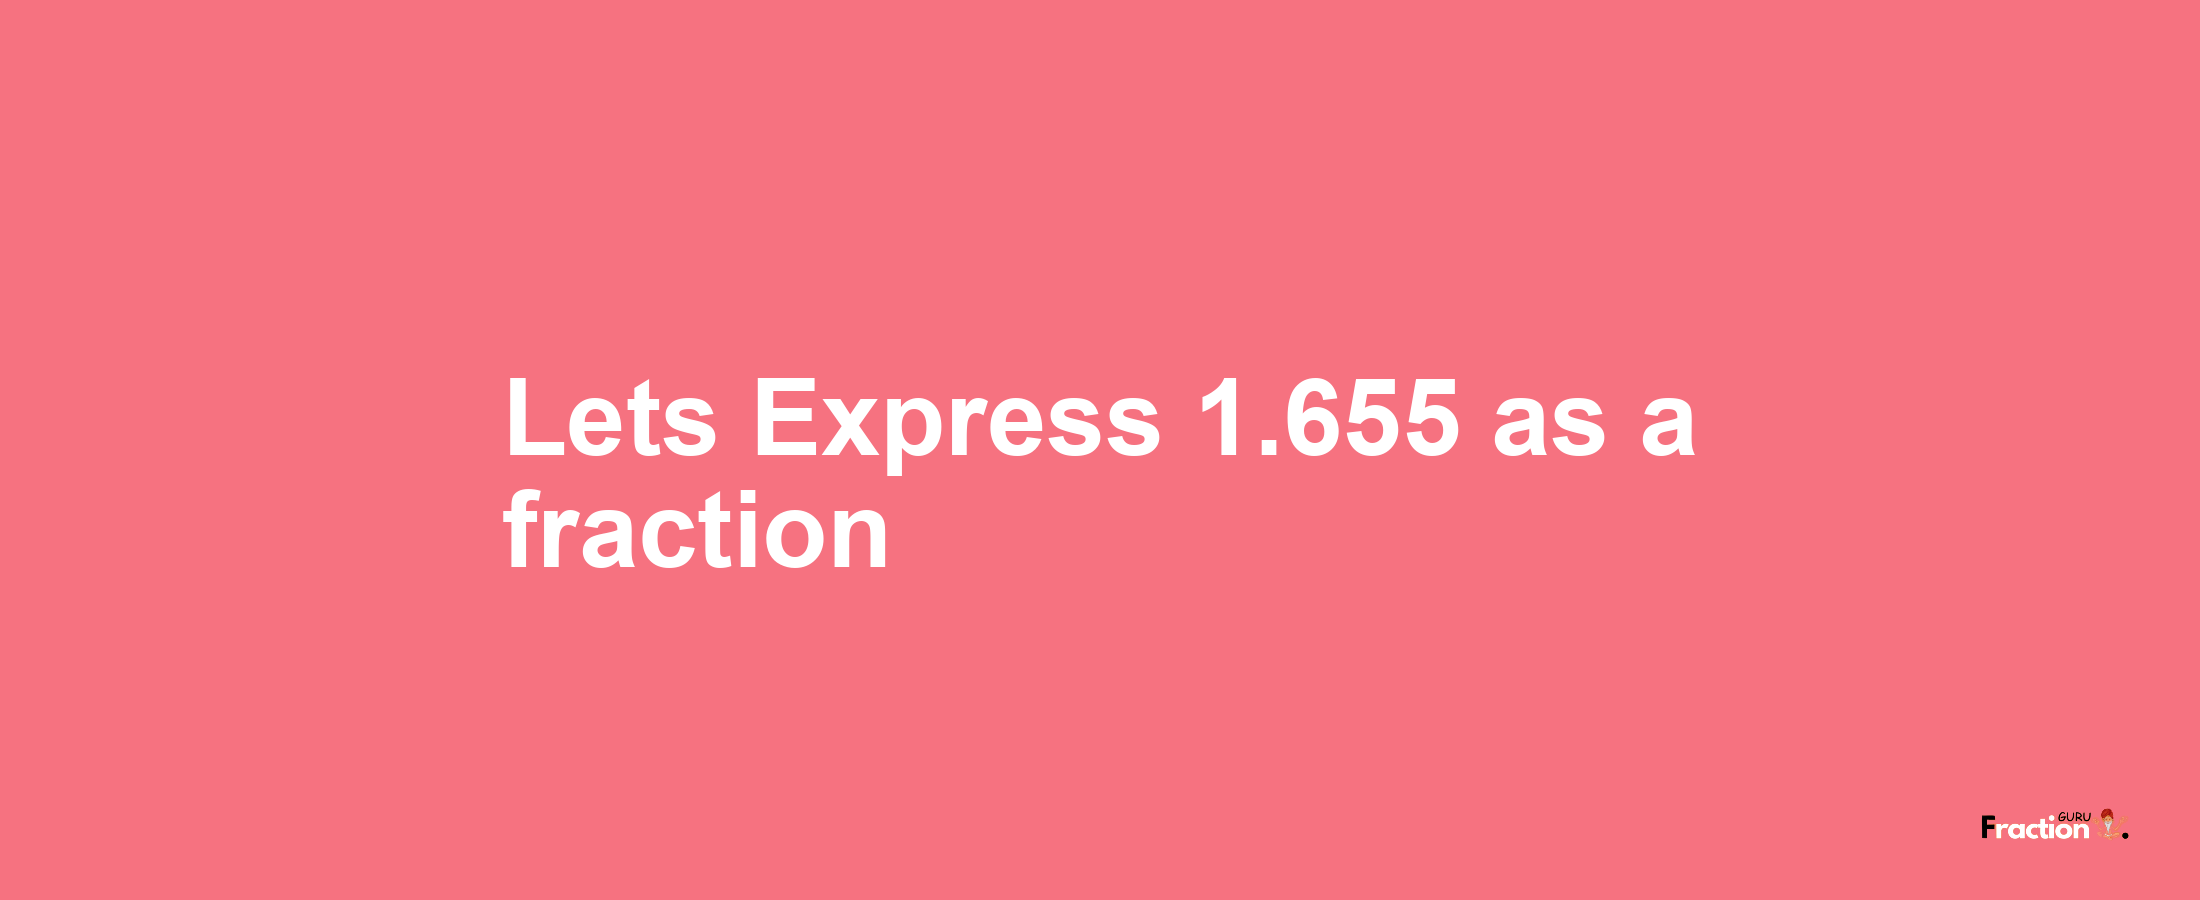 Lets Express 1.655 as afraction